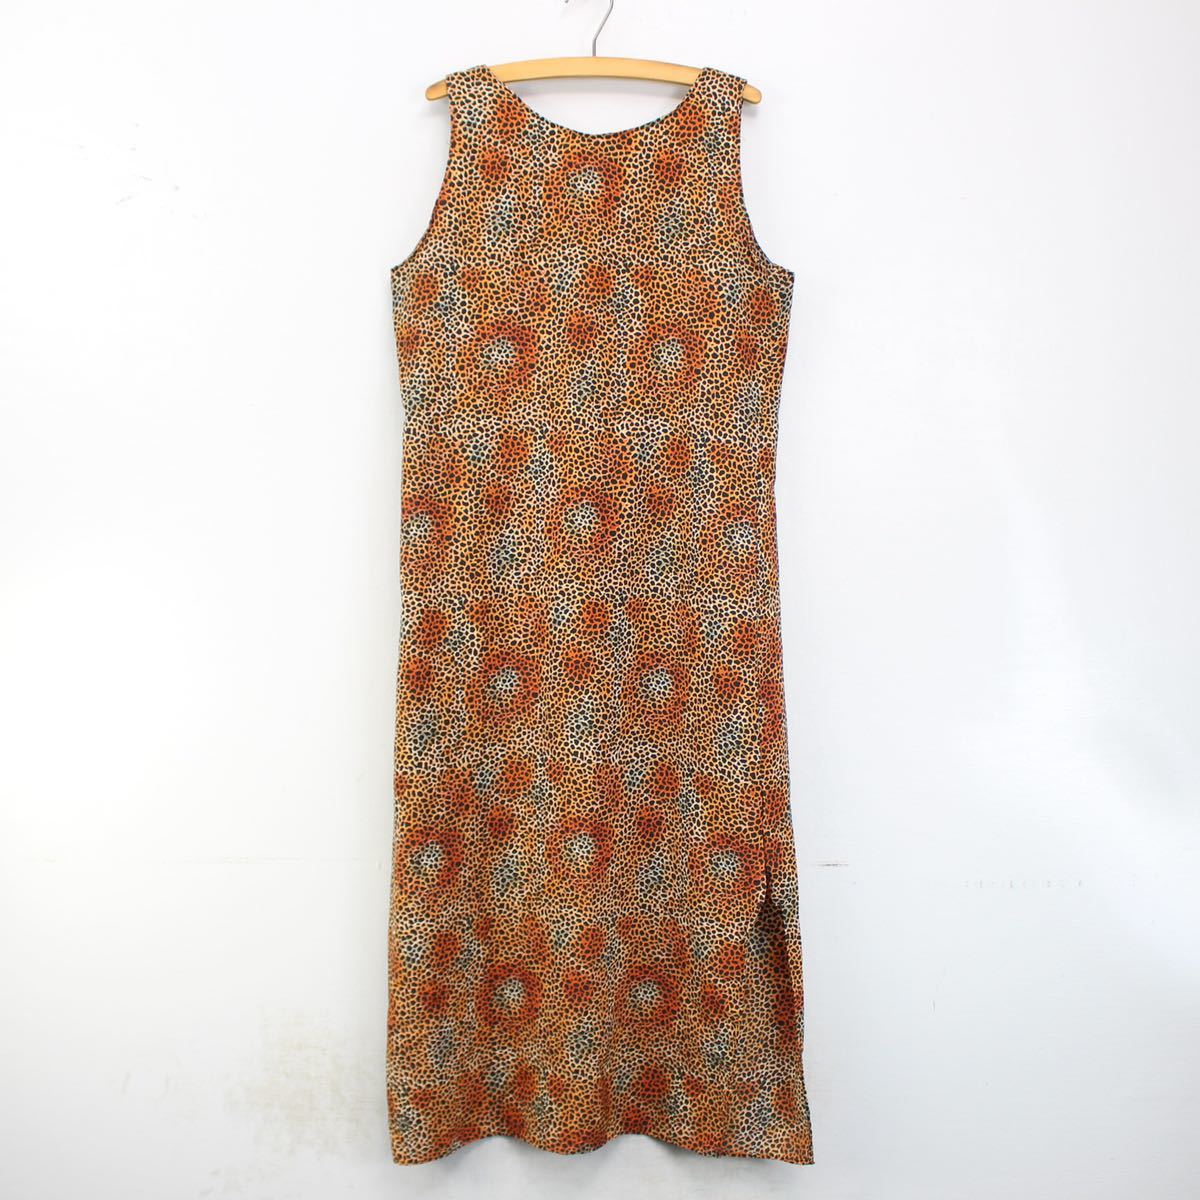 USA VINTAGE STYLE AMERICA LEOPARD PATTERNED NO SLEEVE ONE PIECE/アメリカ古着レオパード柄ノースリーブワンピース_画像5